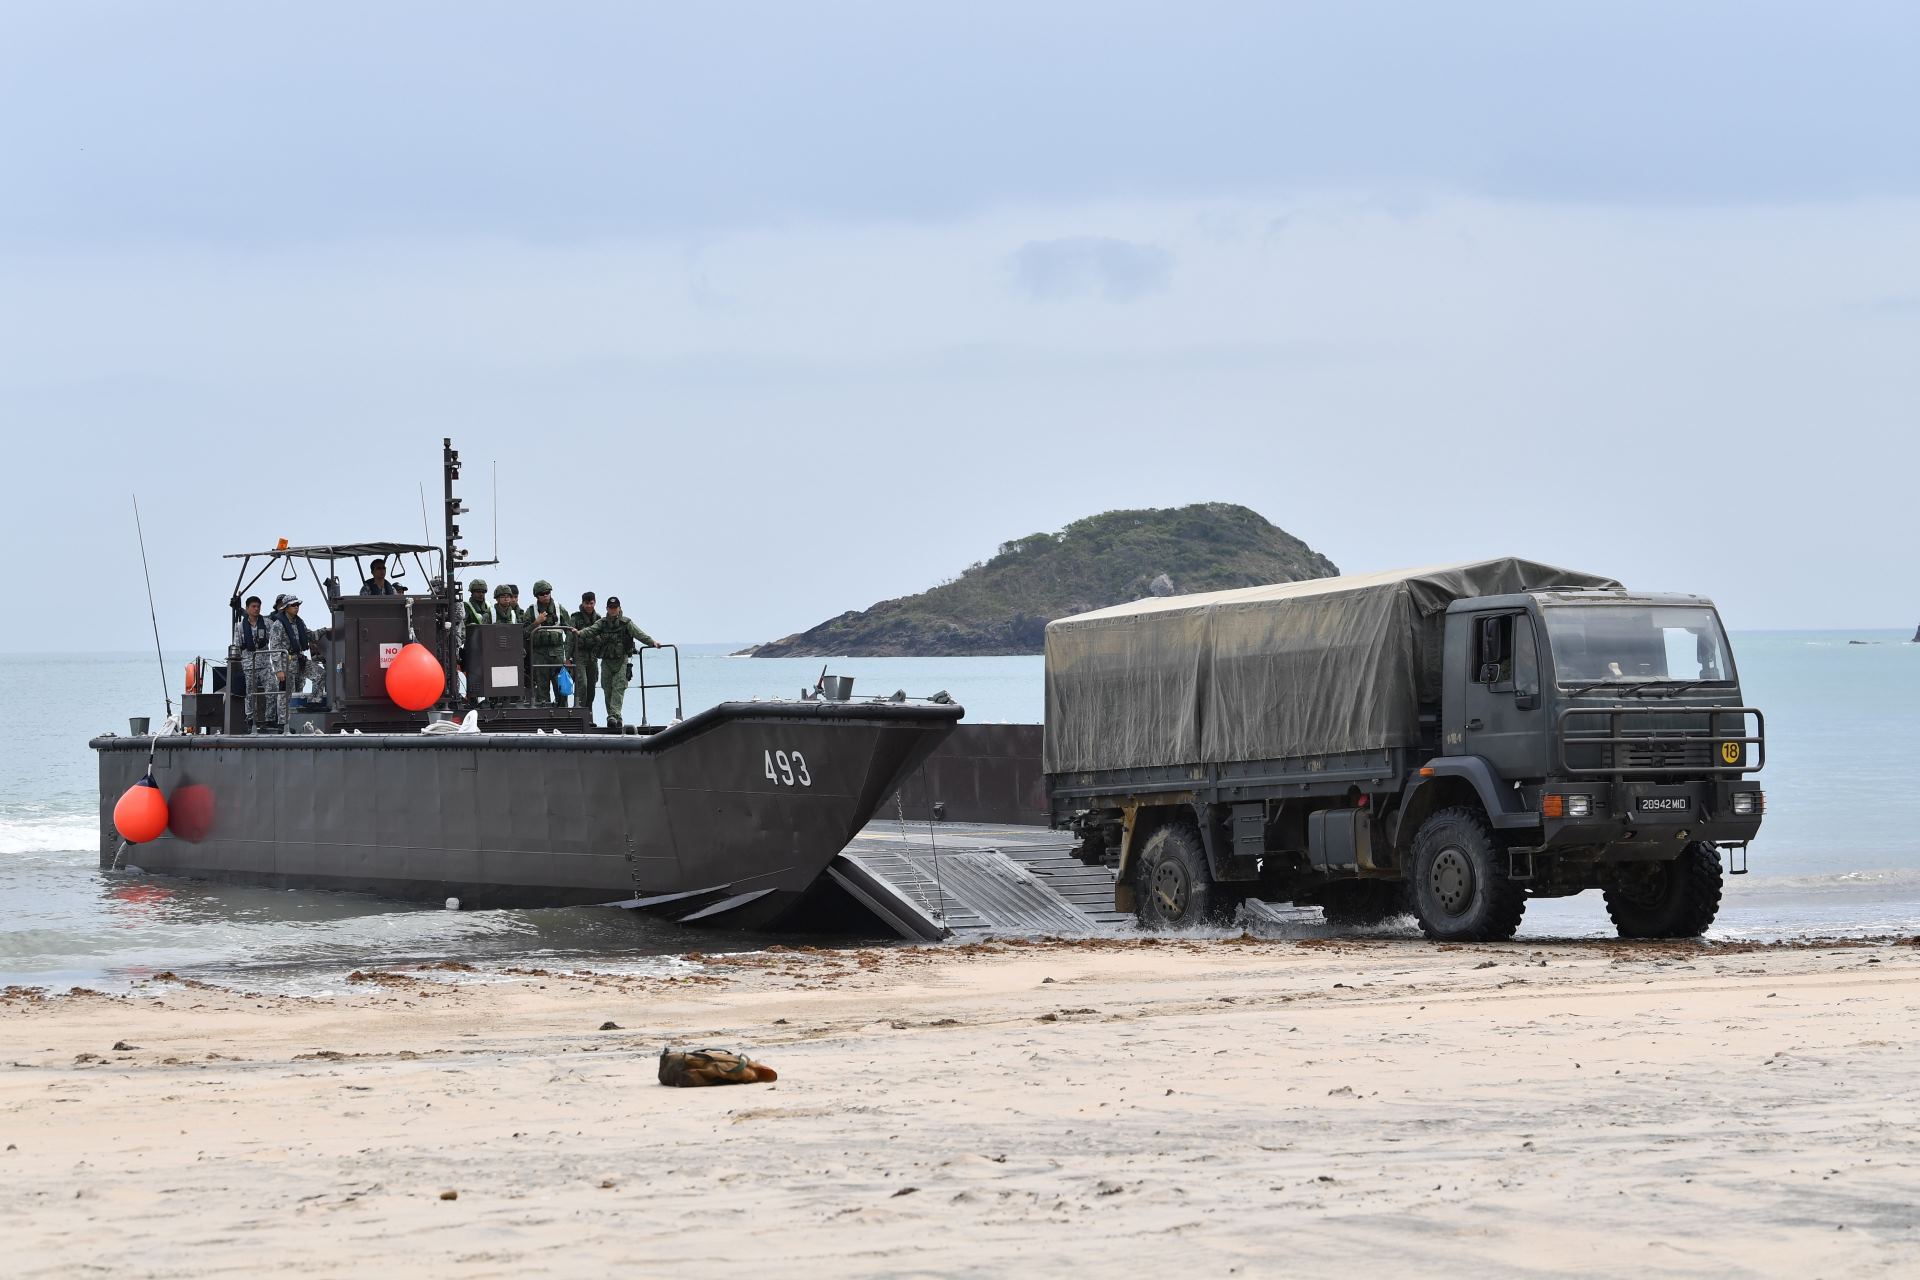 A 5-Tonner vehicle disembarking from the Fast Craft Utility during a ship-to-shore operation during Exercise Trident.